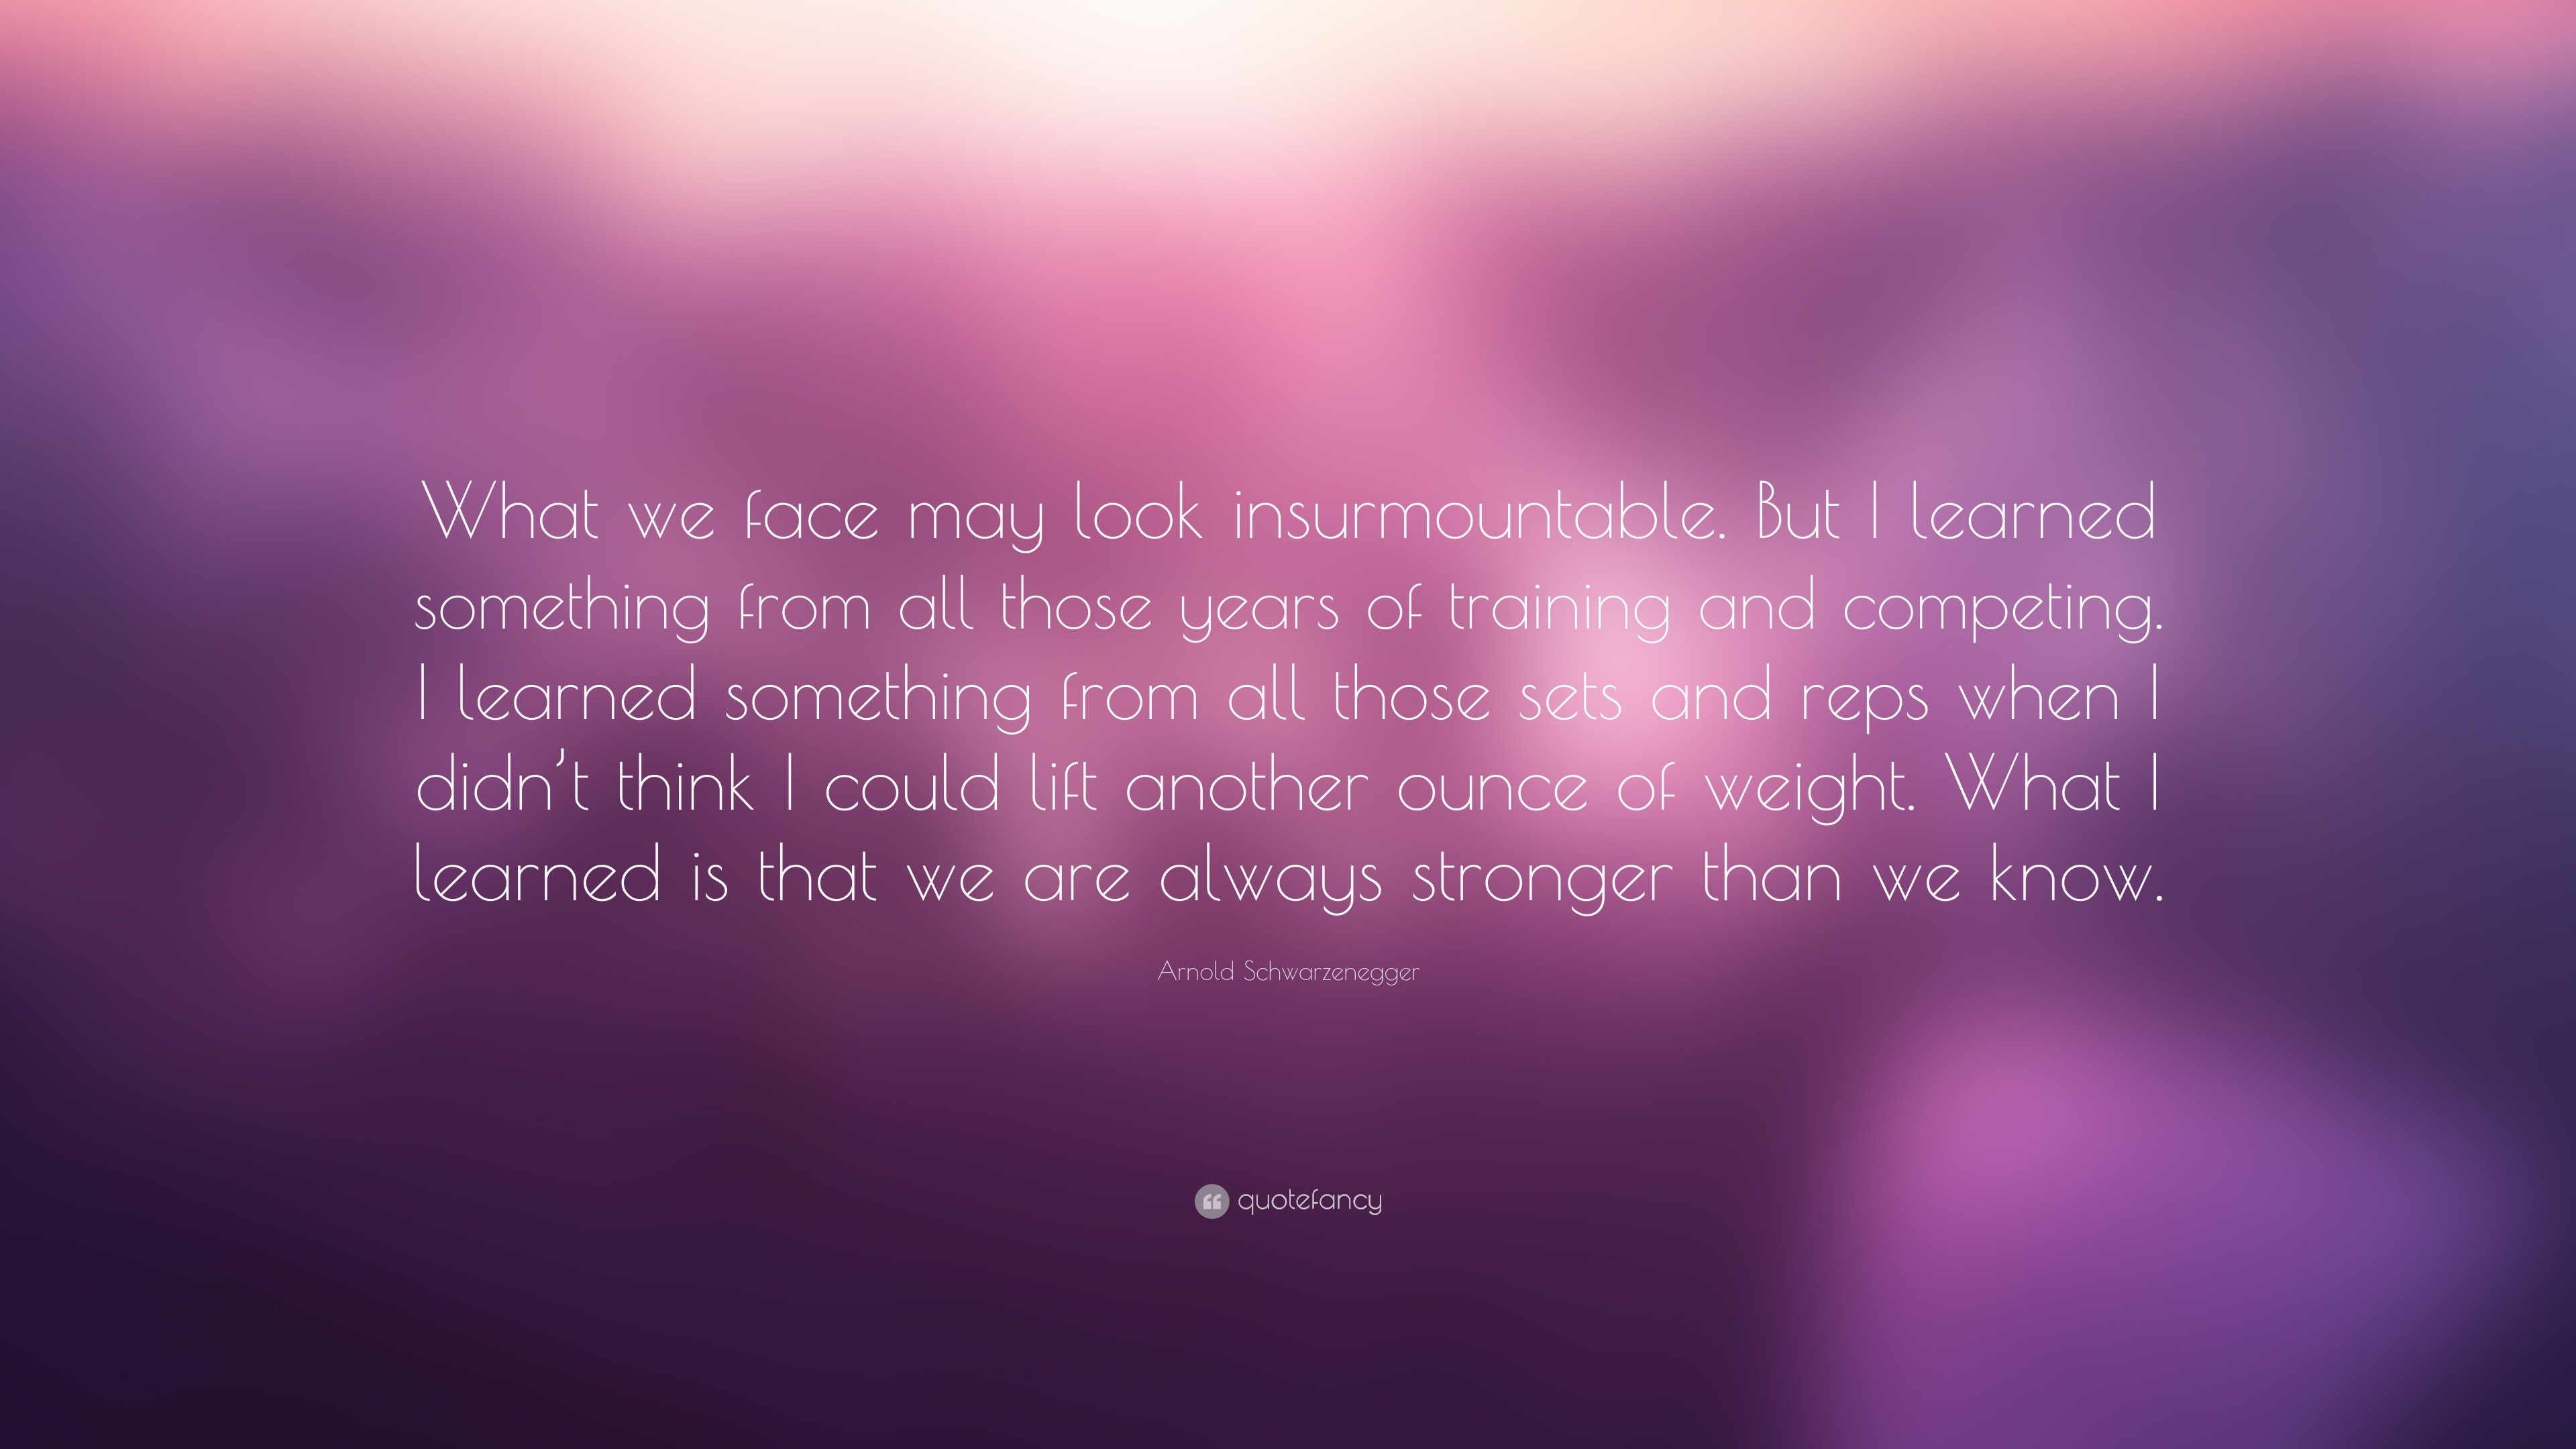 Arnold Schwarzenegger Quote: “What we face may look insurmountable. But ...